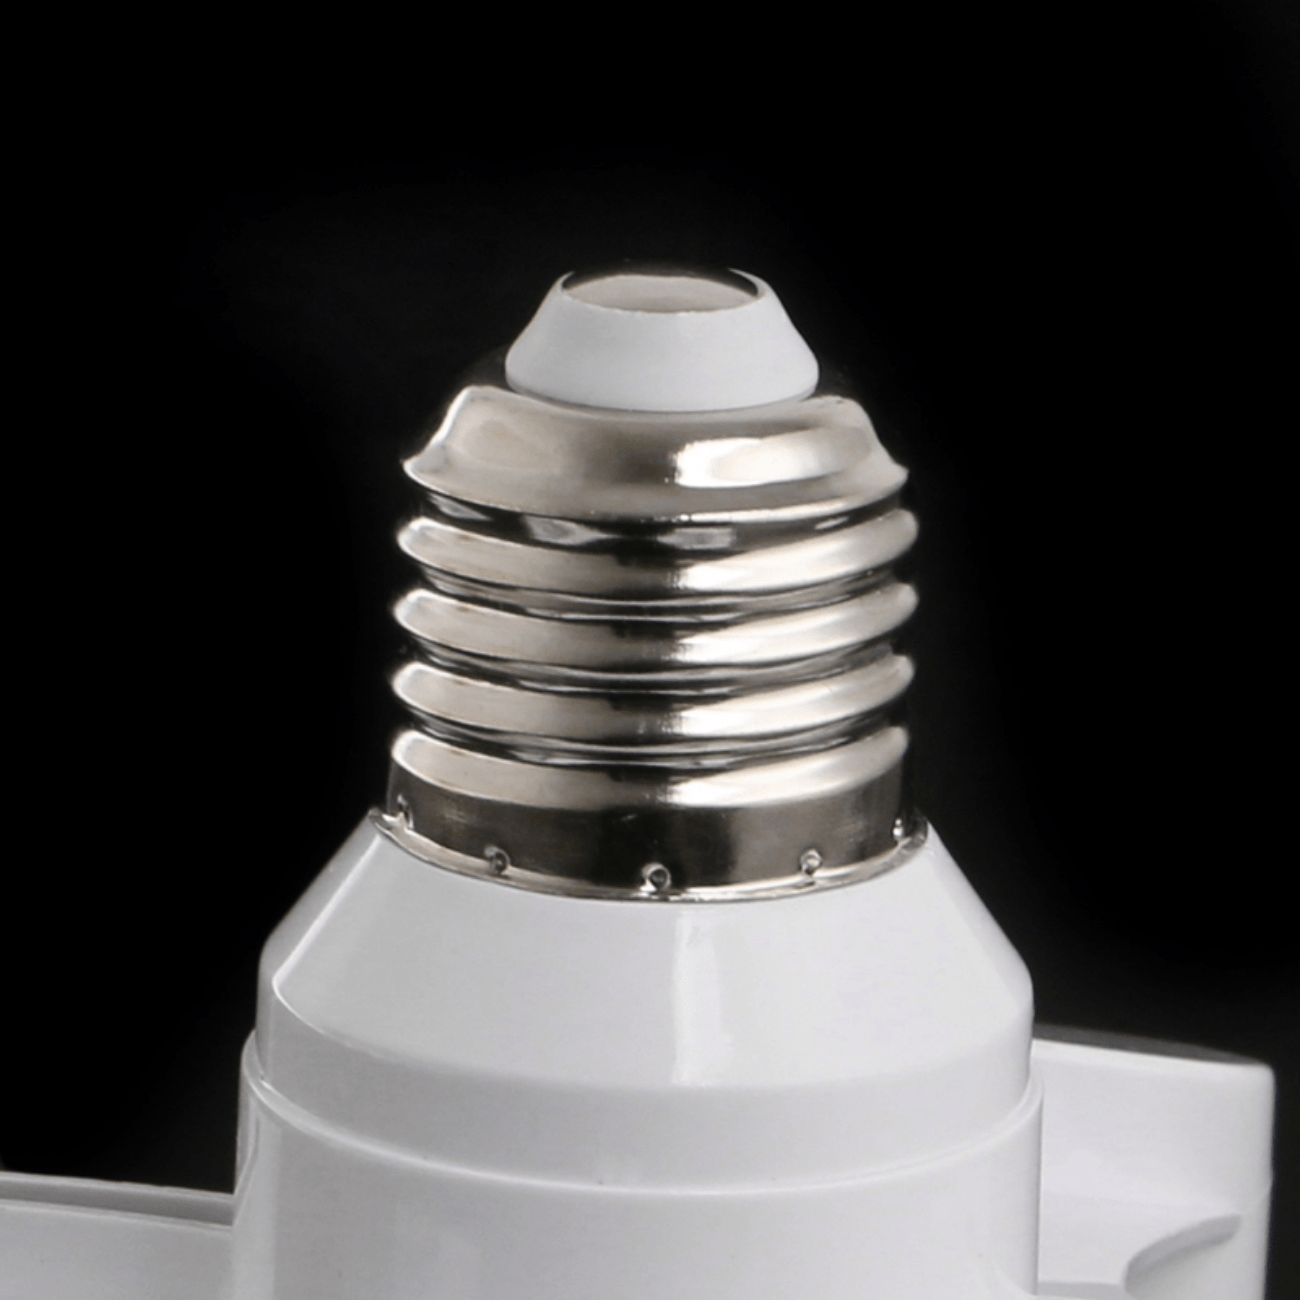 Adjustable White E27 Base Light Socket Splitter With Extension Hose 3/4/5  Way Adapter For Led Deformable Lamp From Ledsupplies, $5.78